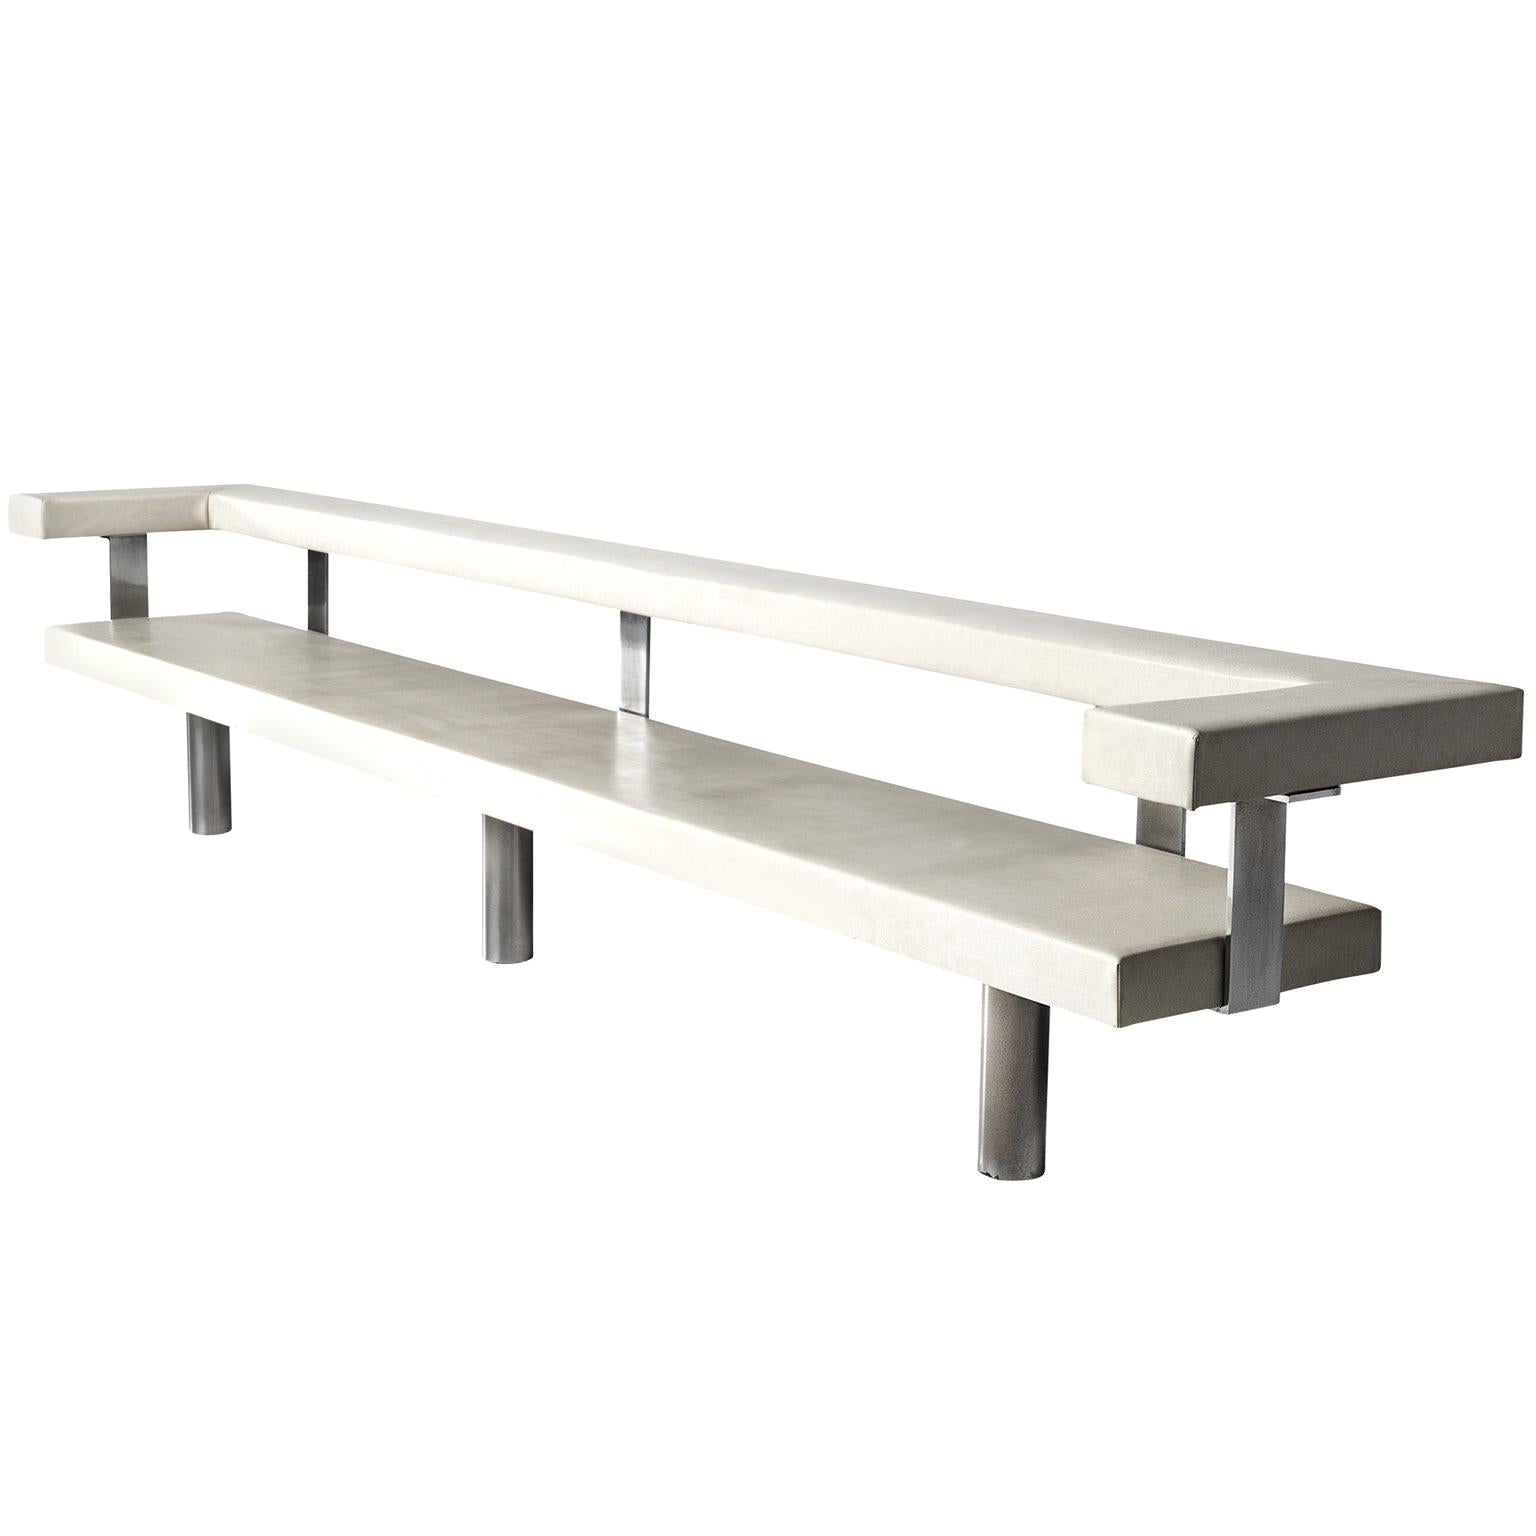 G.W. Rietveld and J. Tricht Long Bench